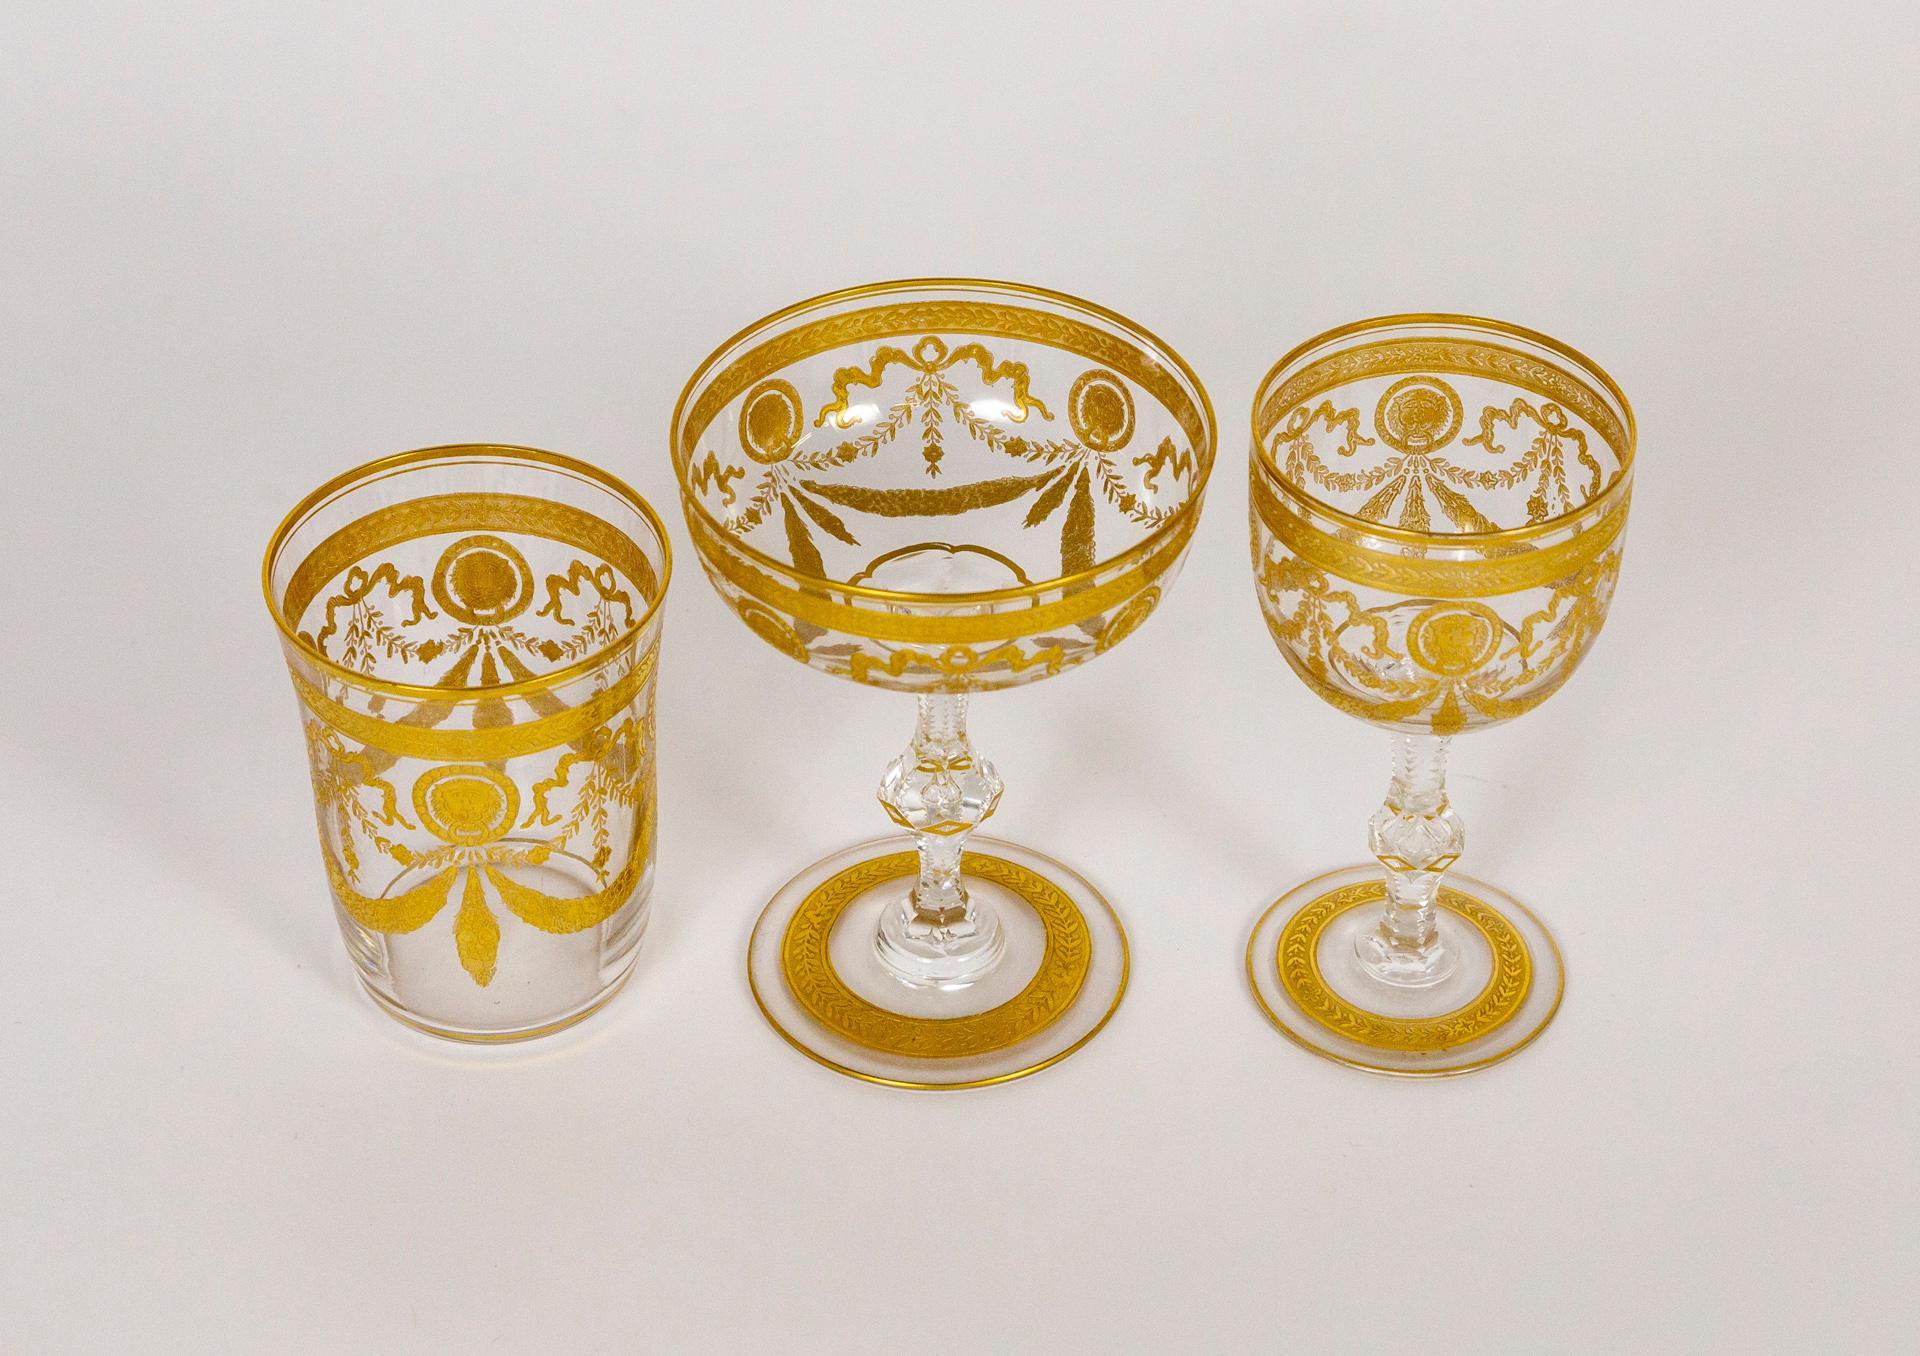 Congress Style Gilt Crystal Coupe Champagne Glasses by Saint-Louis, Set of 4 For Sale 7